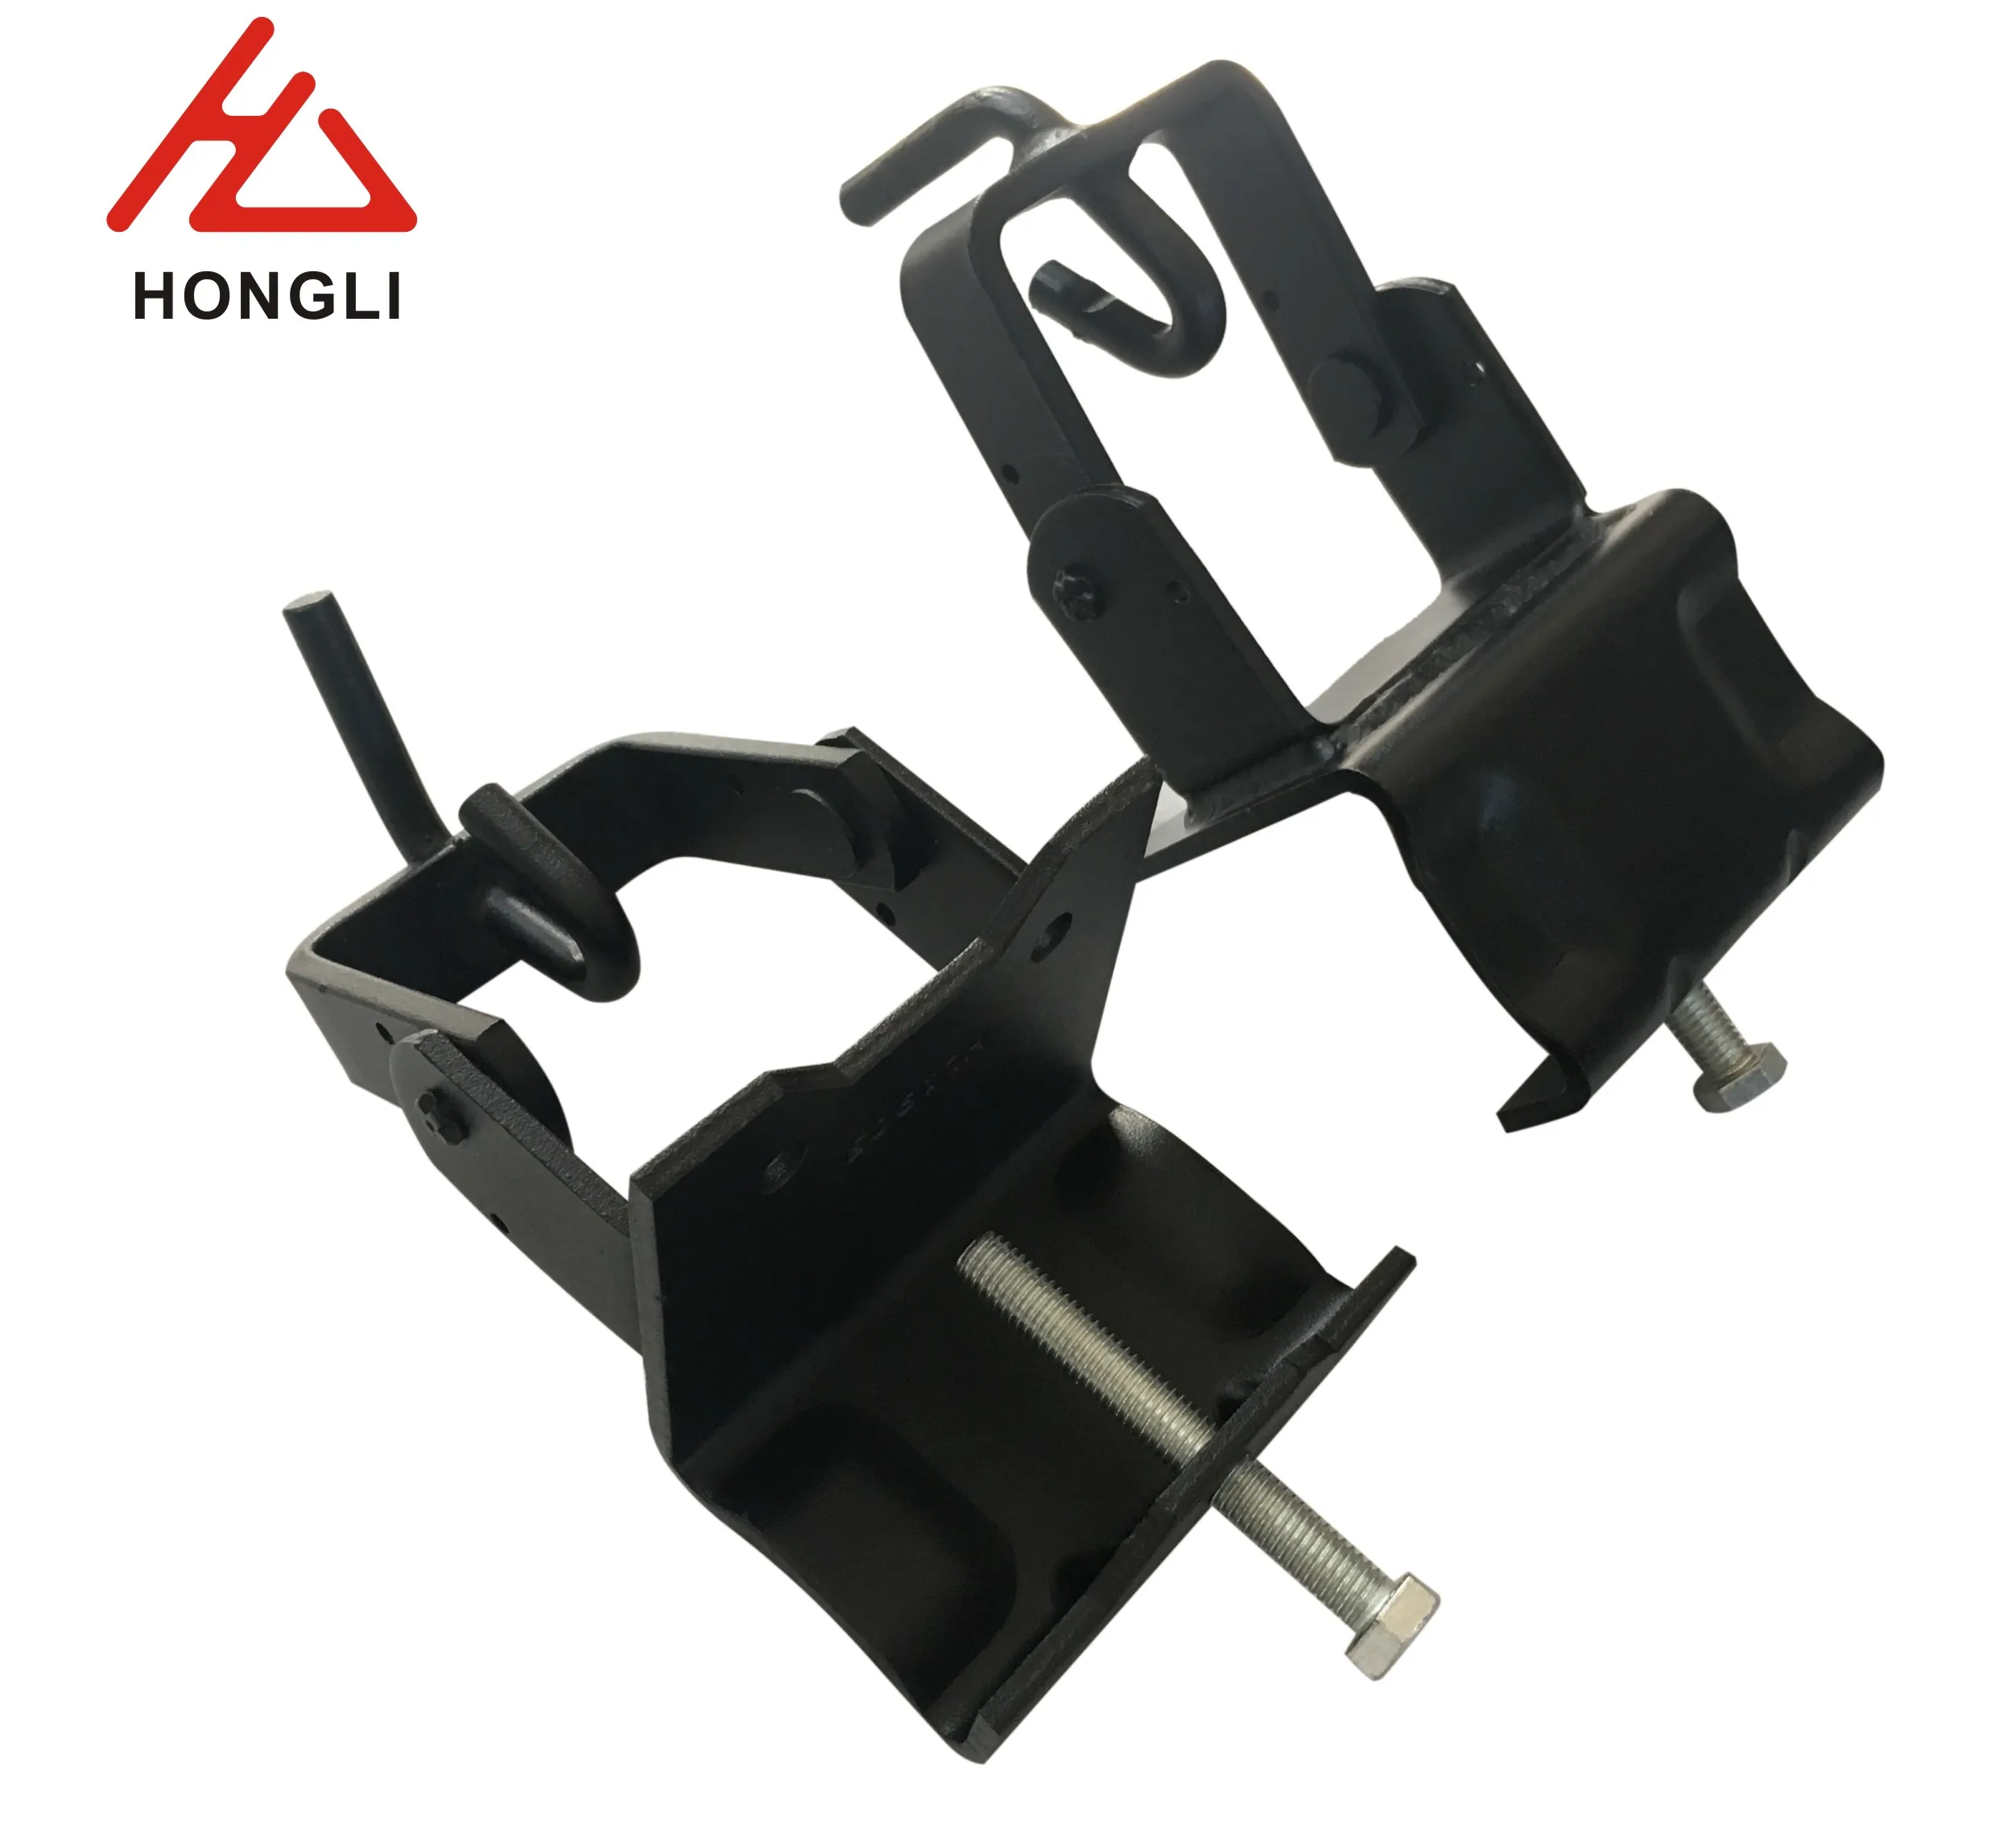 OEM cheap Towing hitch with adjustable tow bar